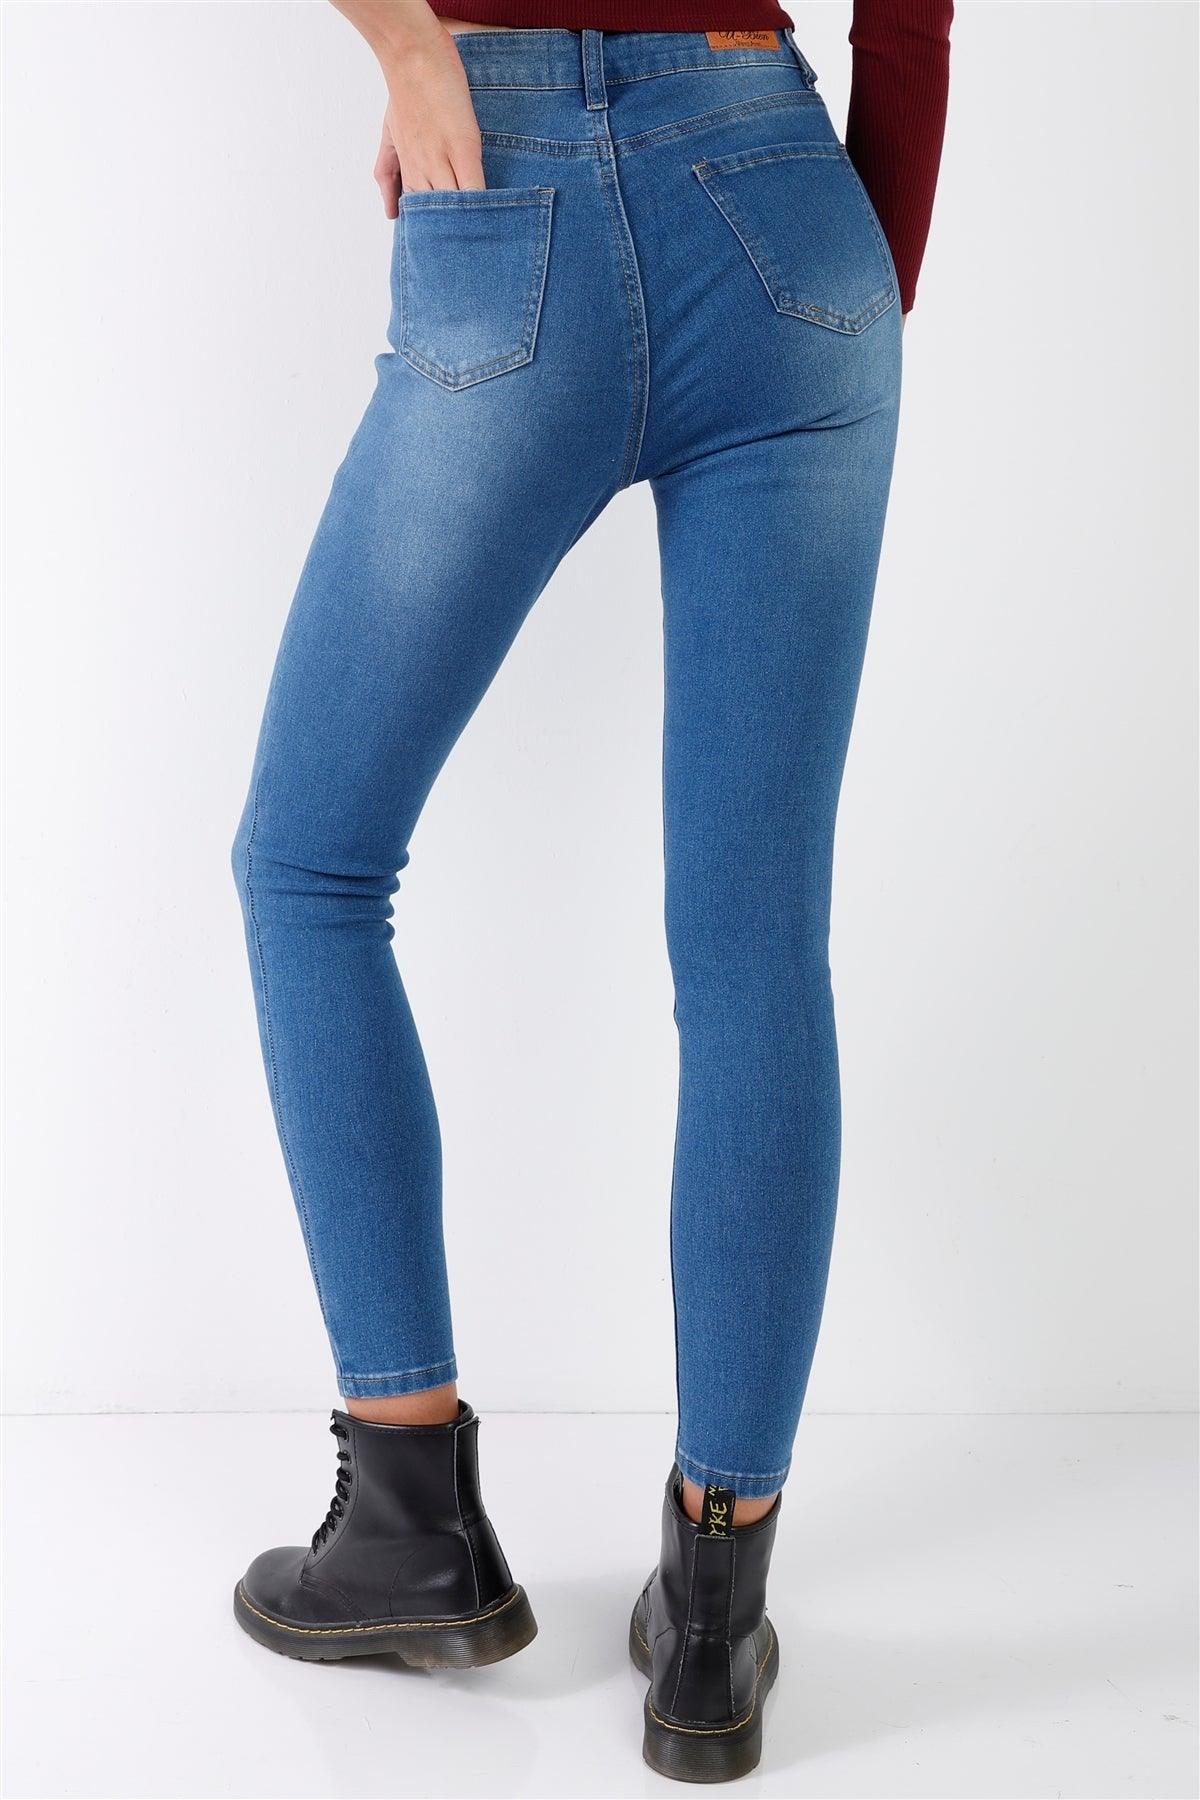 Mid Blue High-Waisted Button Fly Skinny Denim Jeans /1-1-3-2-2-1-1